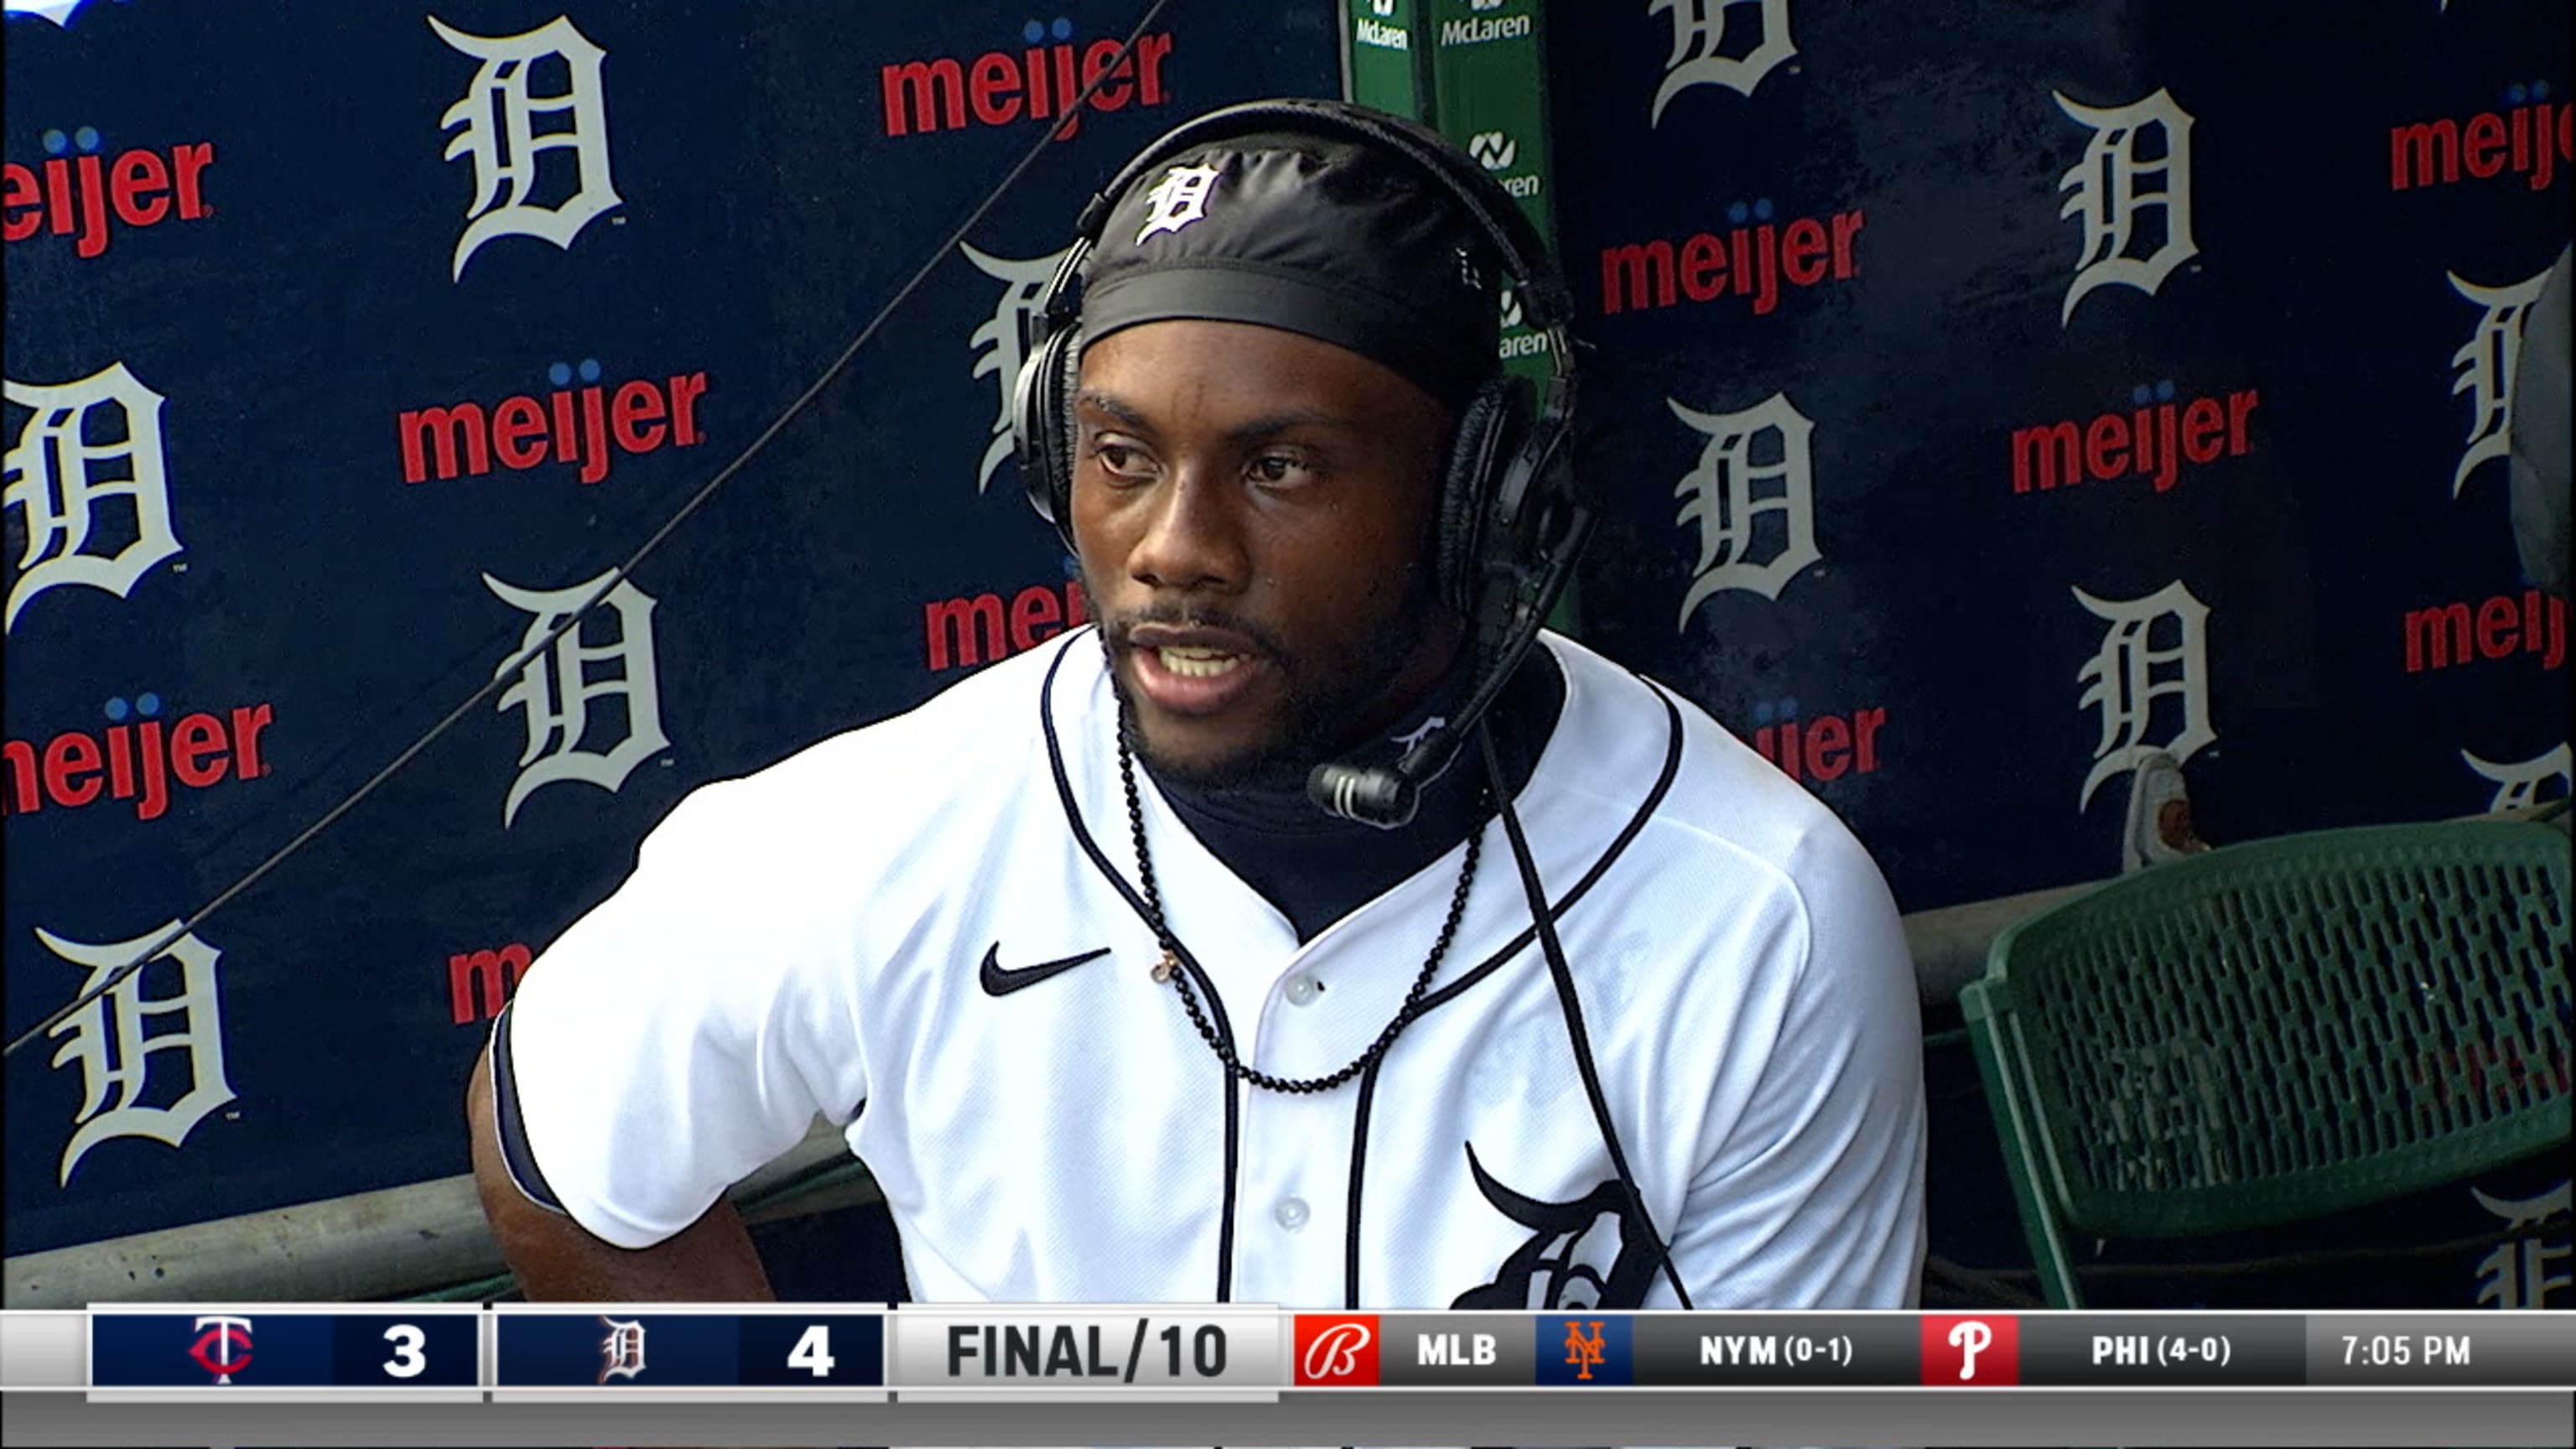 Baddoo homers, drives in 4, Tigers outlast Nationals 8-6 - The San